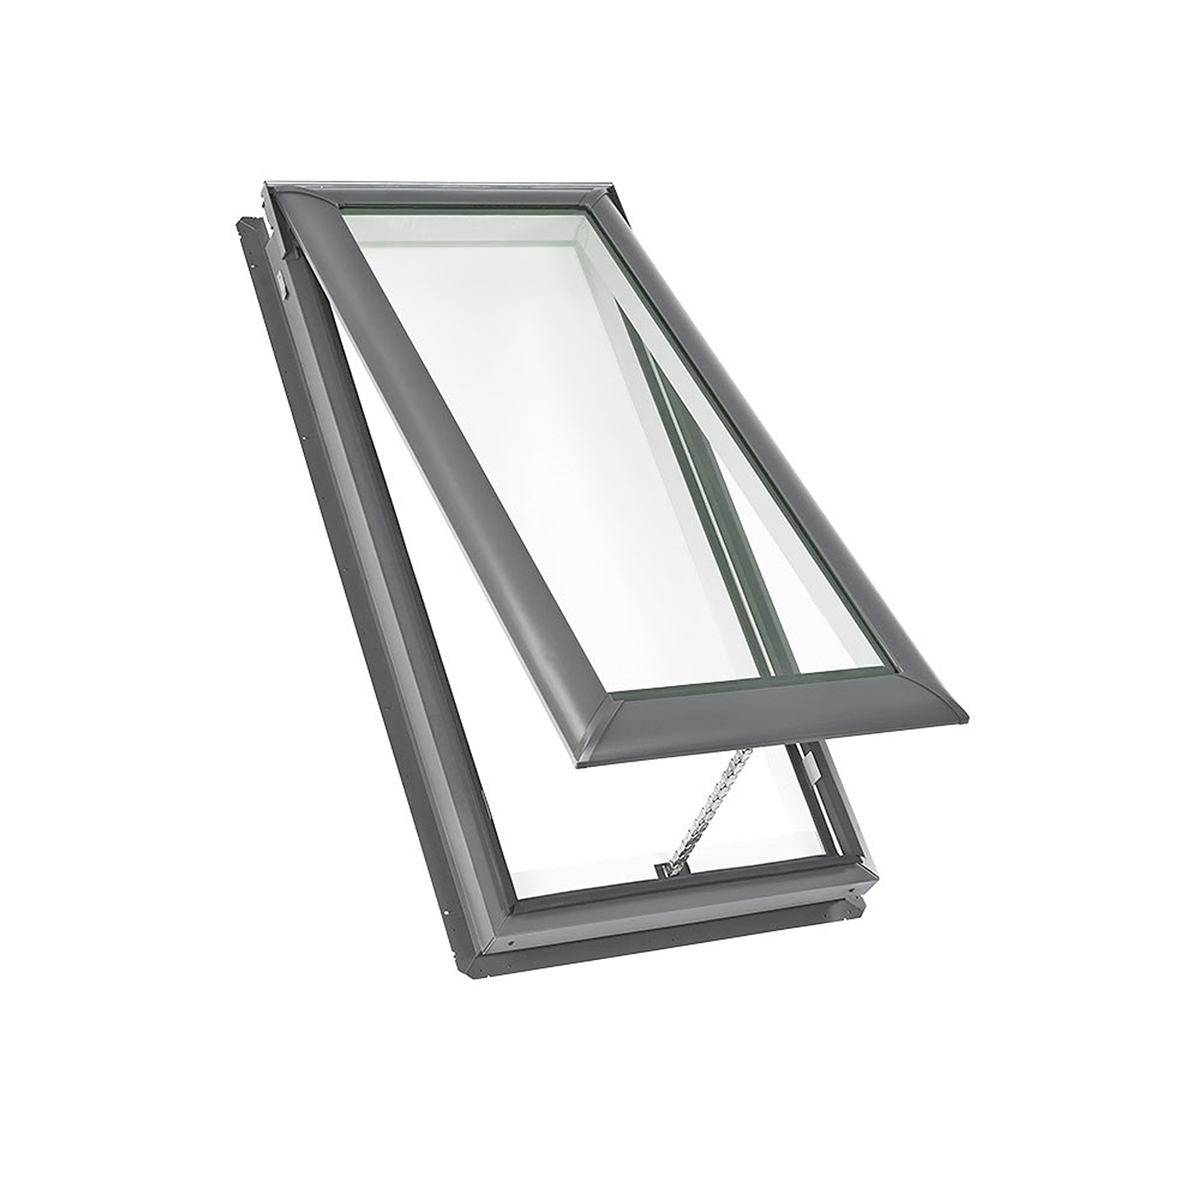 Manual Deck-Mount Skylight with Laminated Low-E3 Glass - 44-1/4 in. x 26-7/8 inc.- VS S01